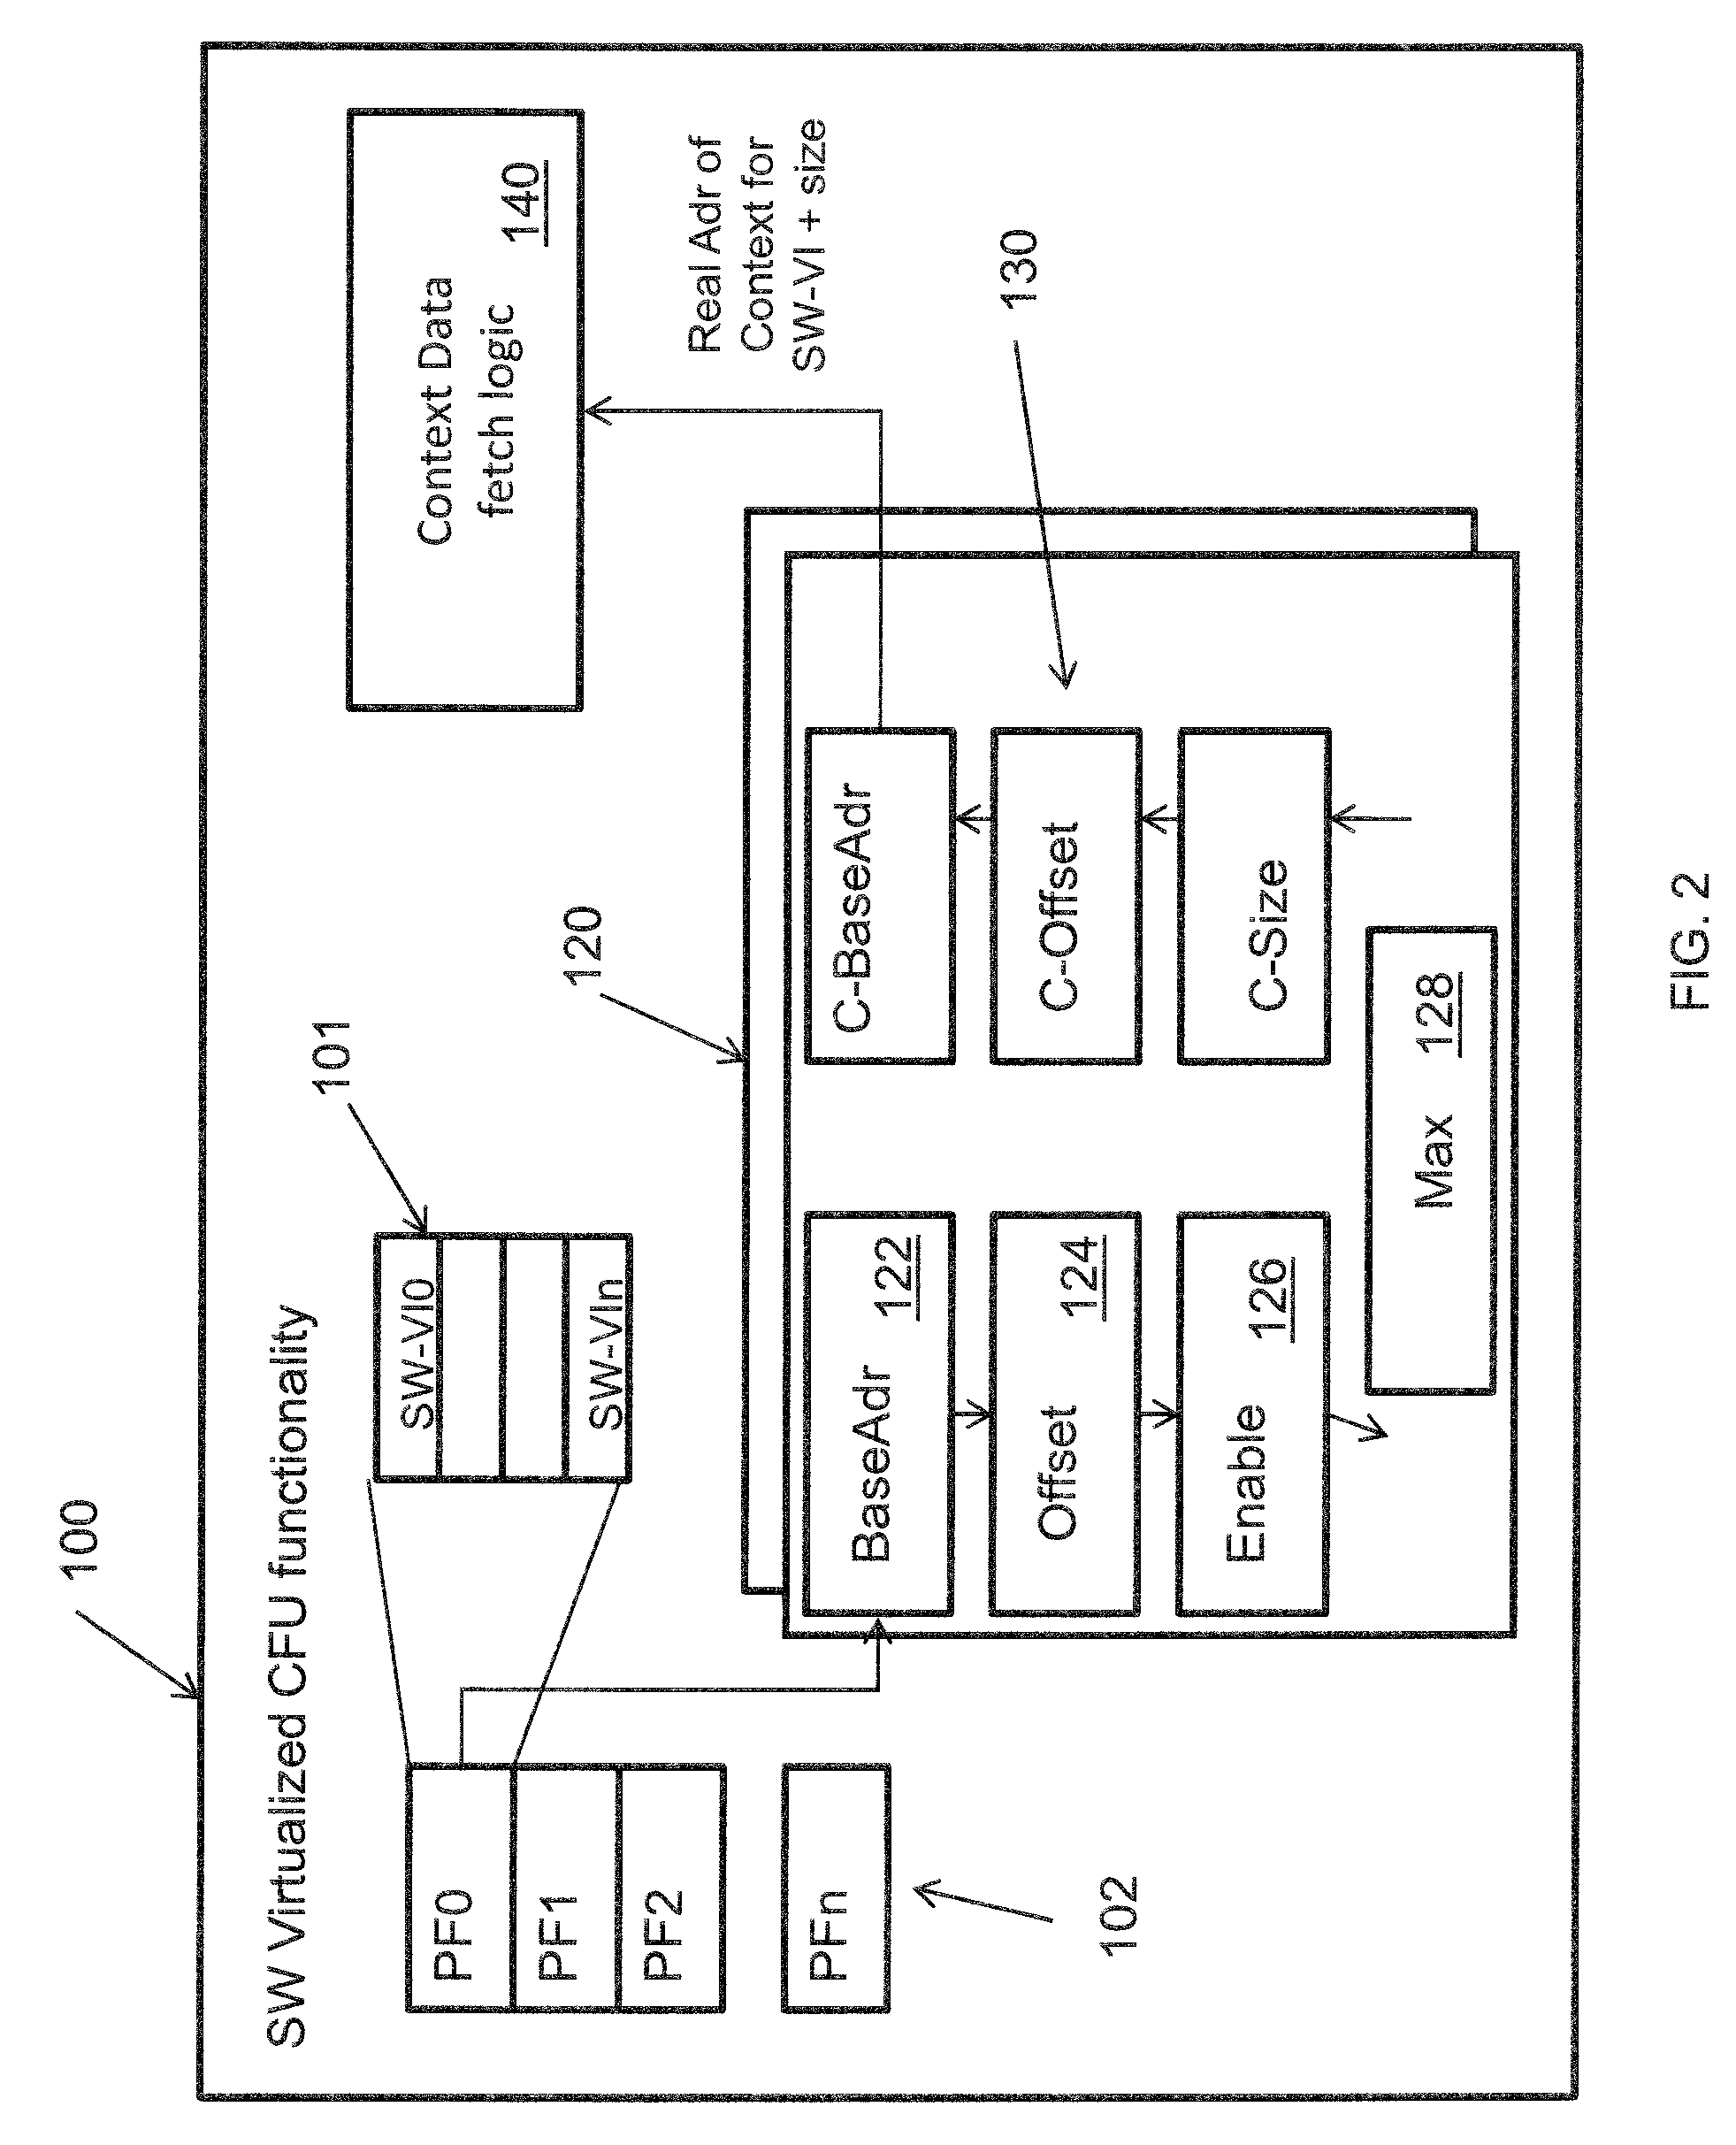 Method for pushing work request-associated contexts into an io device